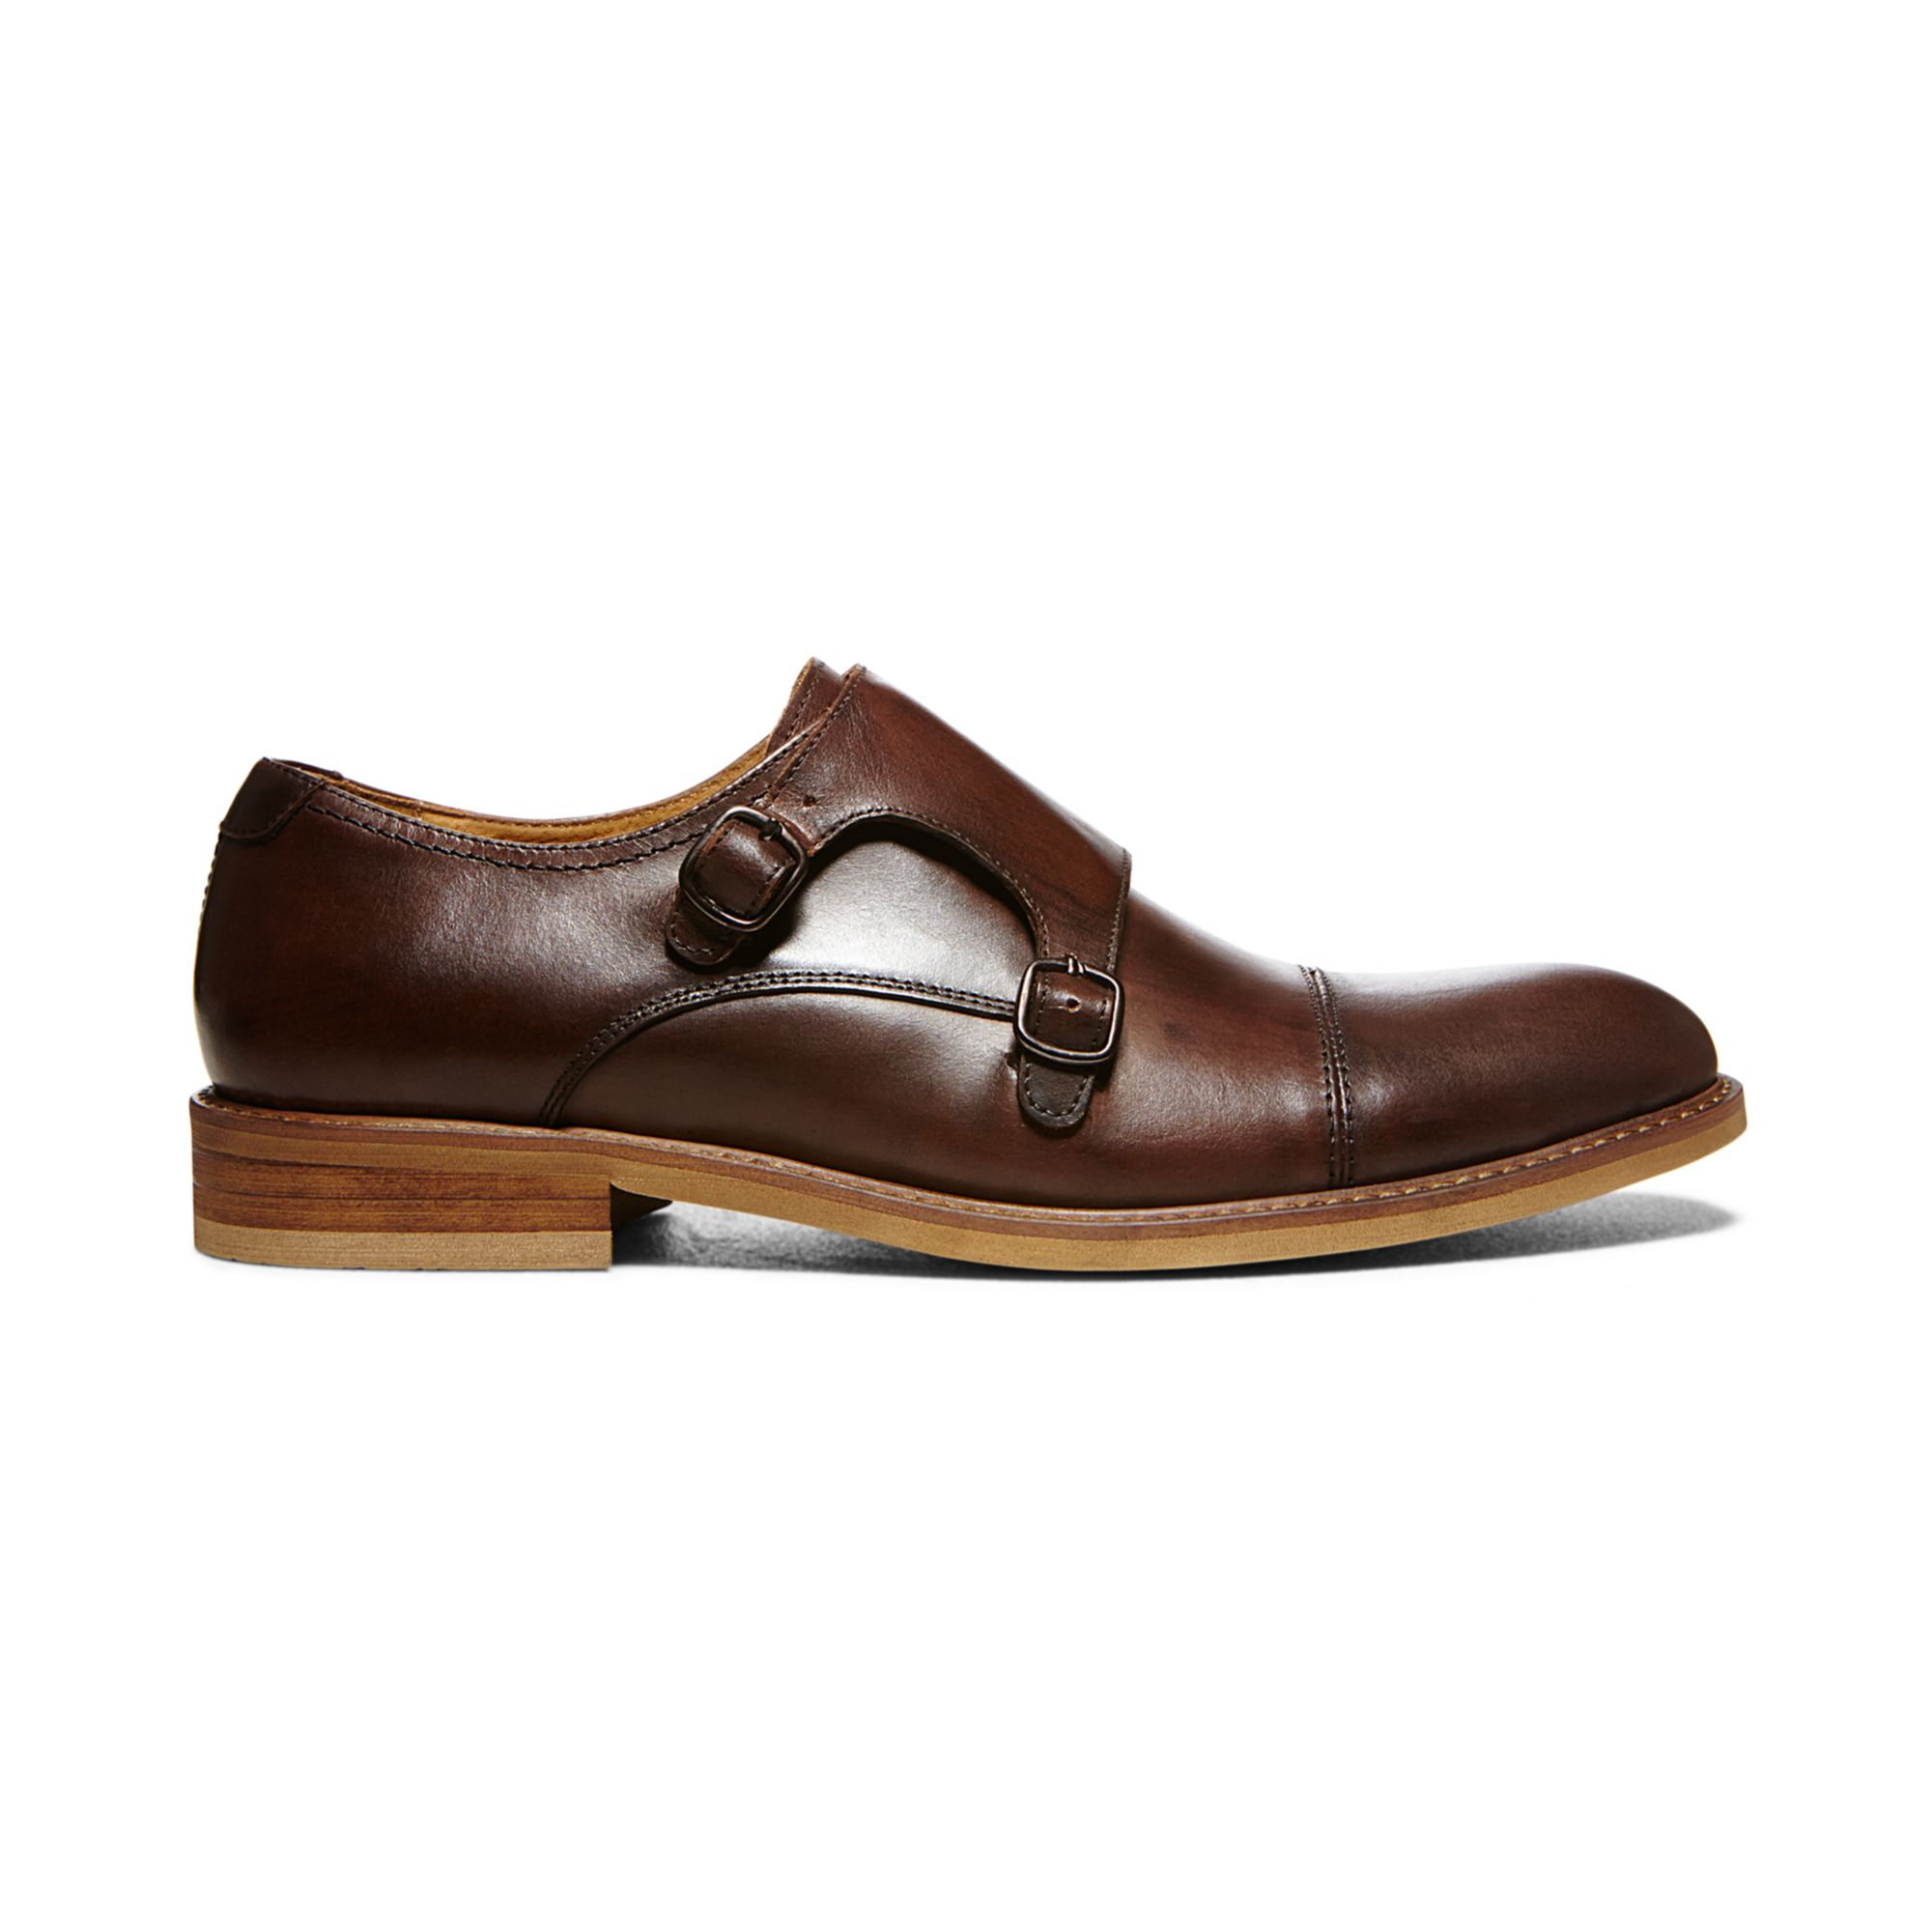 Steve Madden Runnit Monk Strap Shoes in 